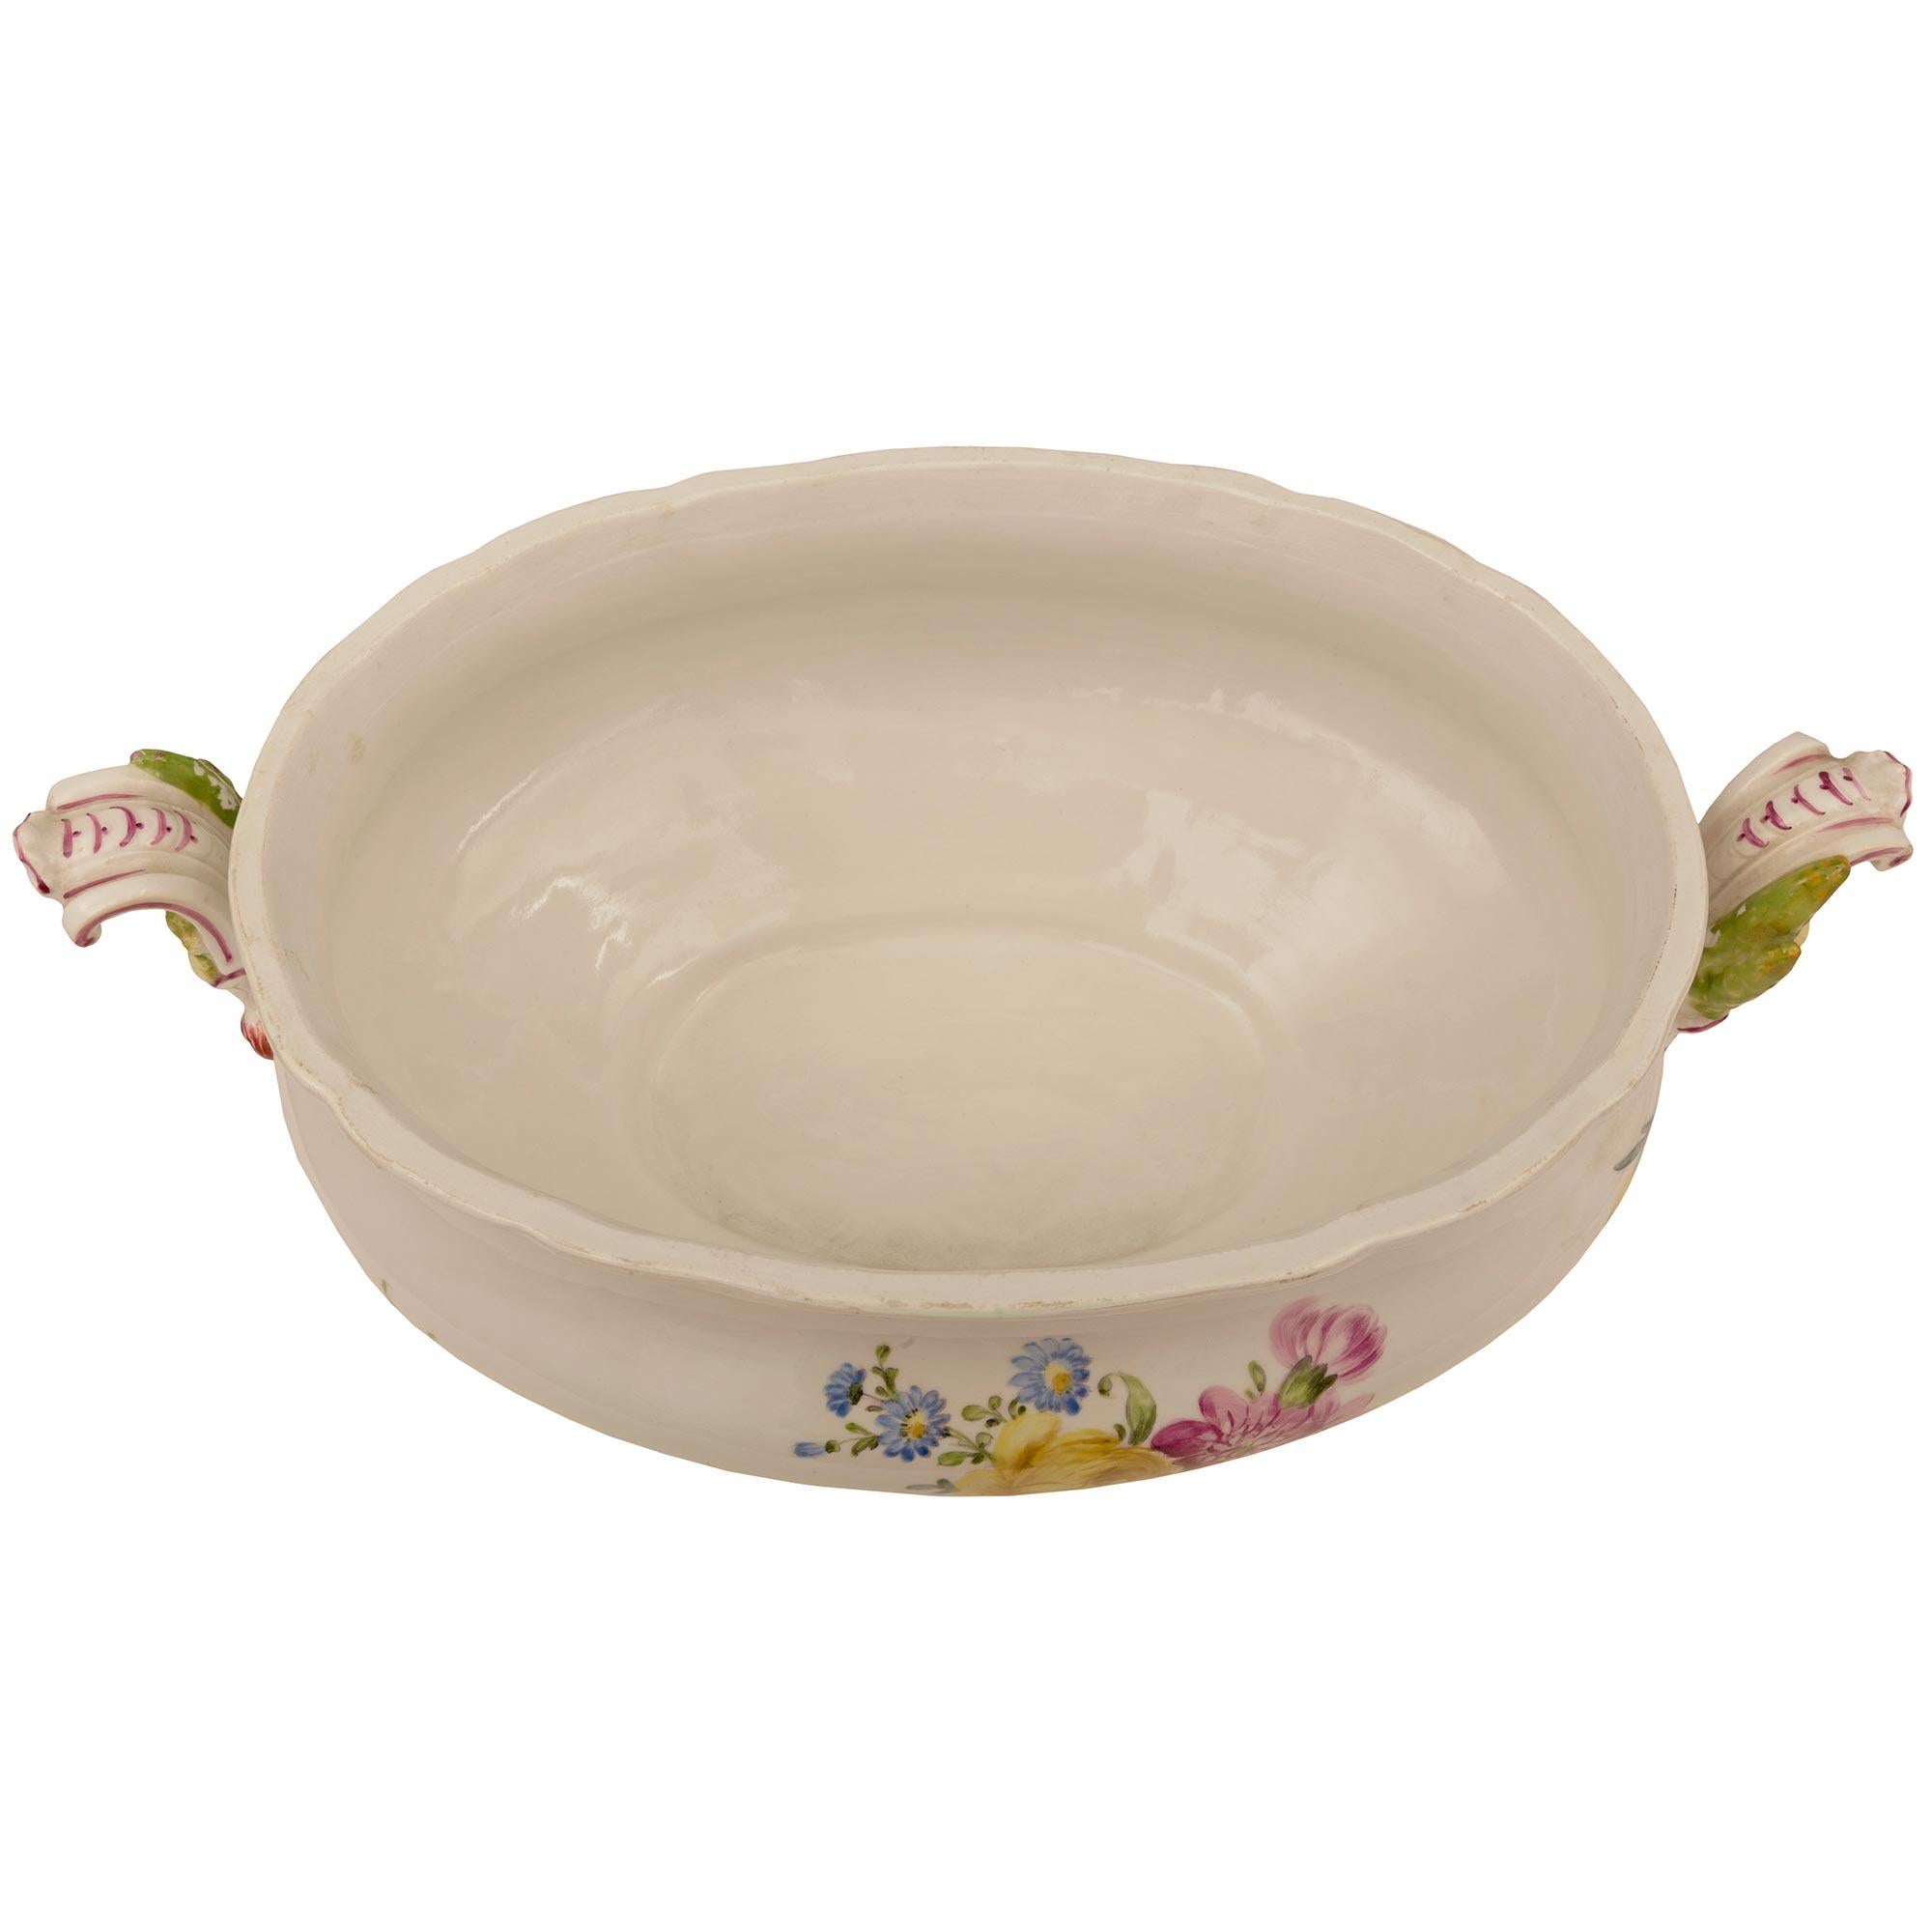 A charming German 19th century Meissen Porcelain lidded tureen. The oblong shaped tureen displays beautiful finely detailed hand painted blooming flowers with vivid colors throughout and lovely scrolled handles at each side. Above is a charming